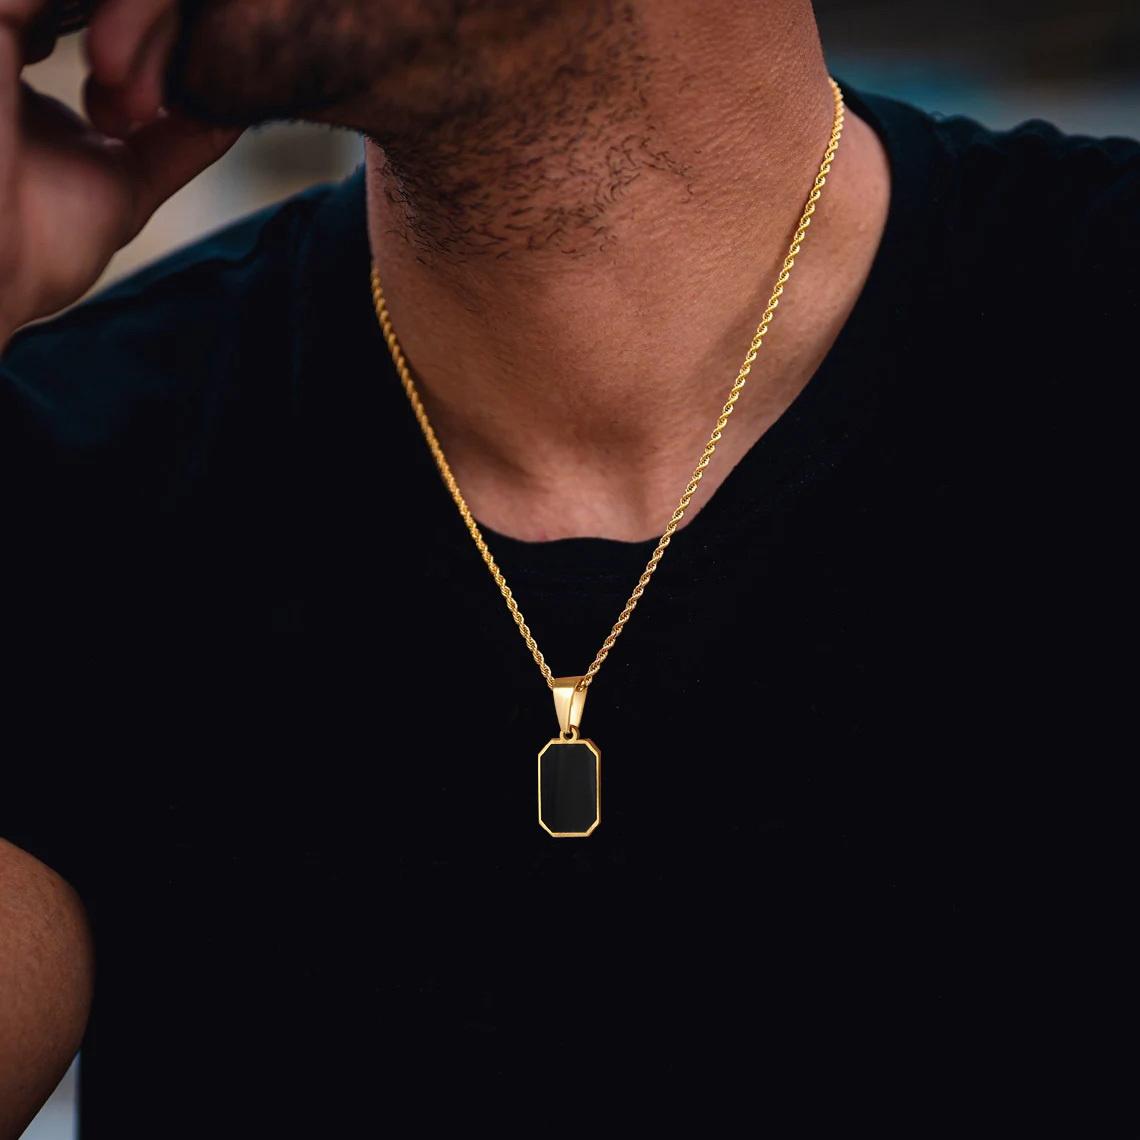 Taylor Erotic Lingerie Stylish Gold Color Mens Geometric Square Necklaces,Black Enamel Rectangle Pendant with Rope Box Chain Collar Gift Jewelry